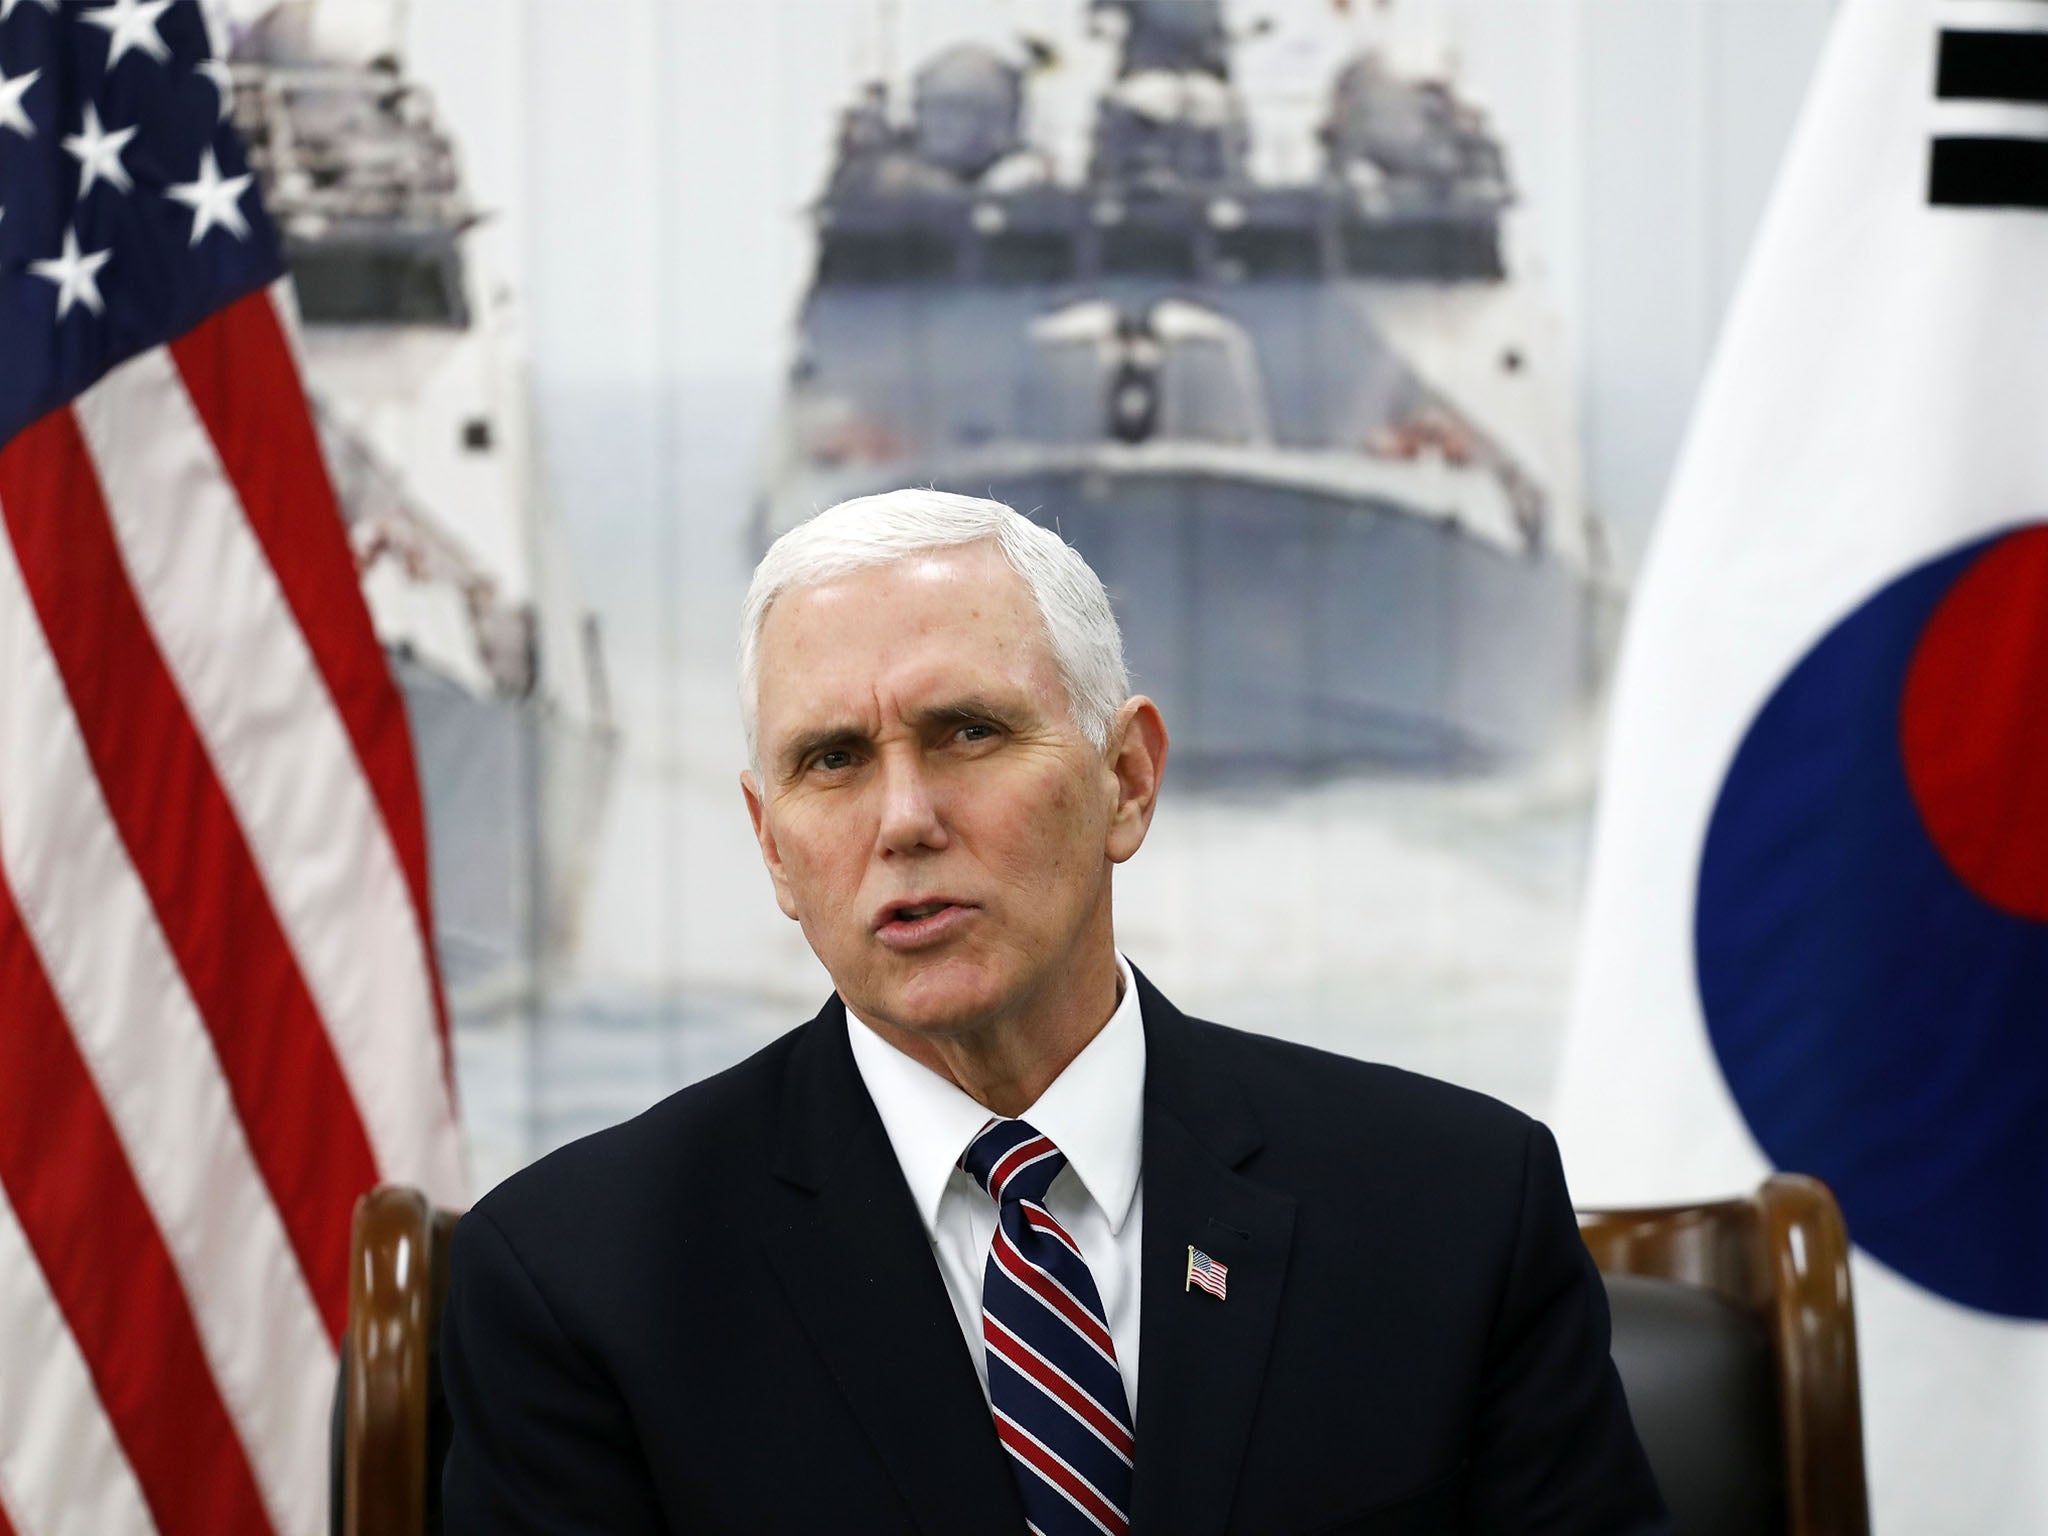 Mr Pence during his visit to South Korea